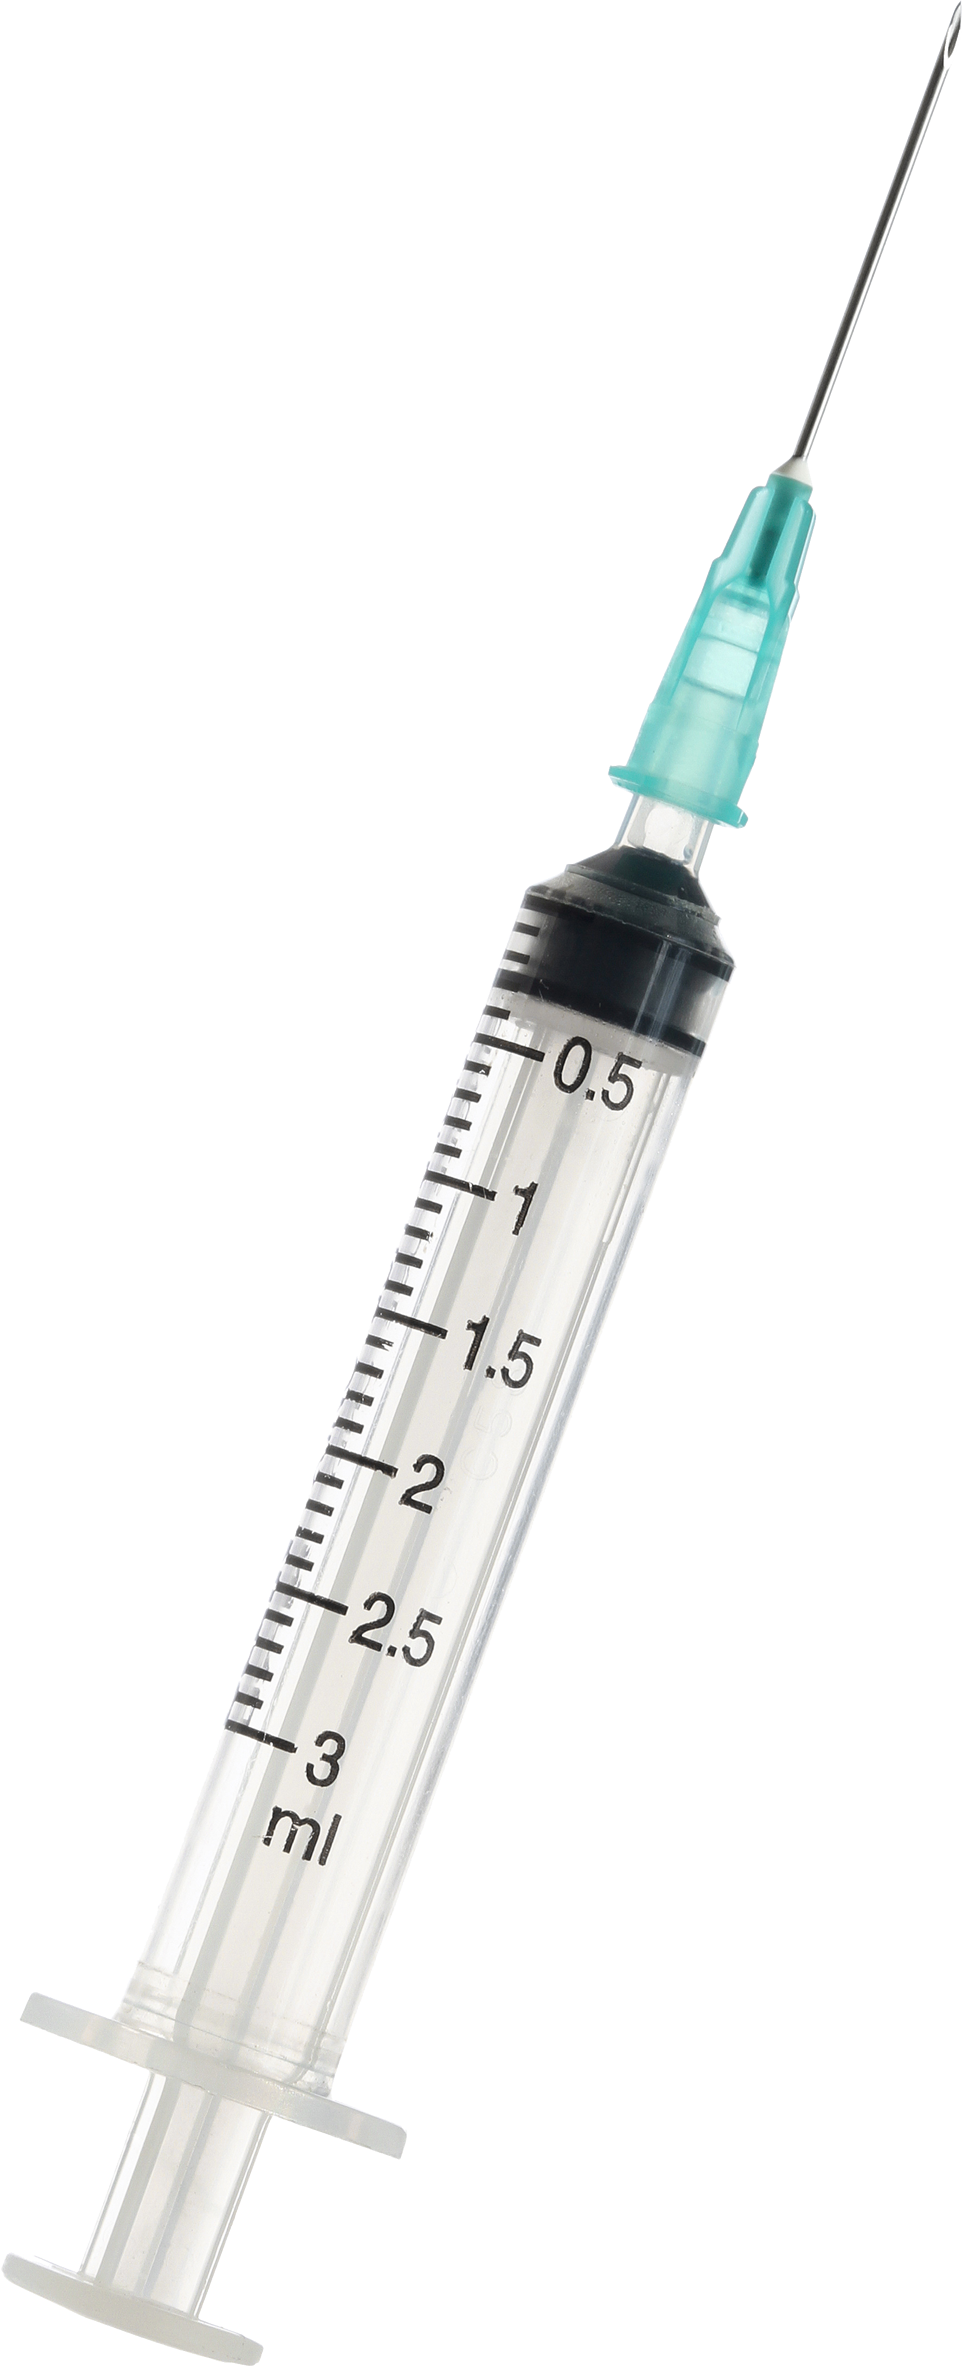 Medical needle drawing at. Vaccine clipart injector